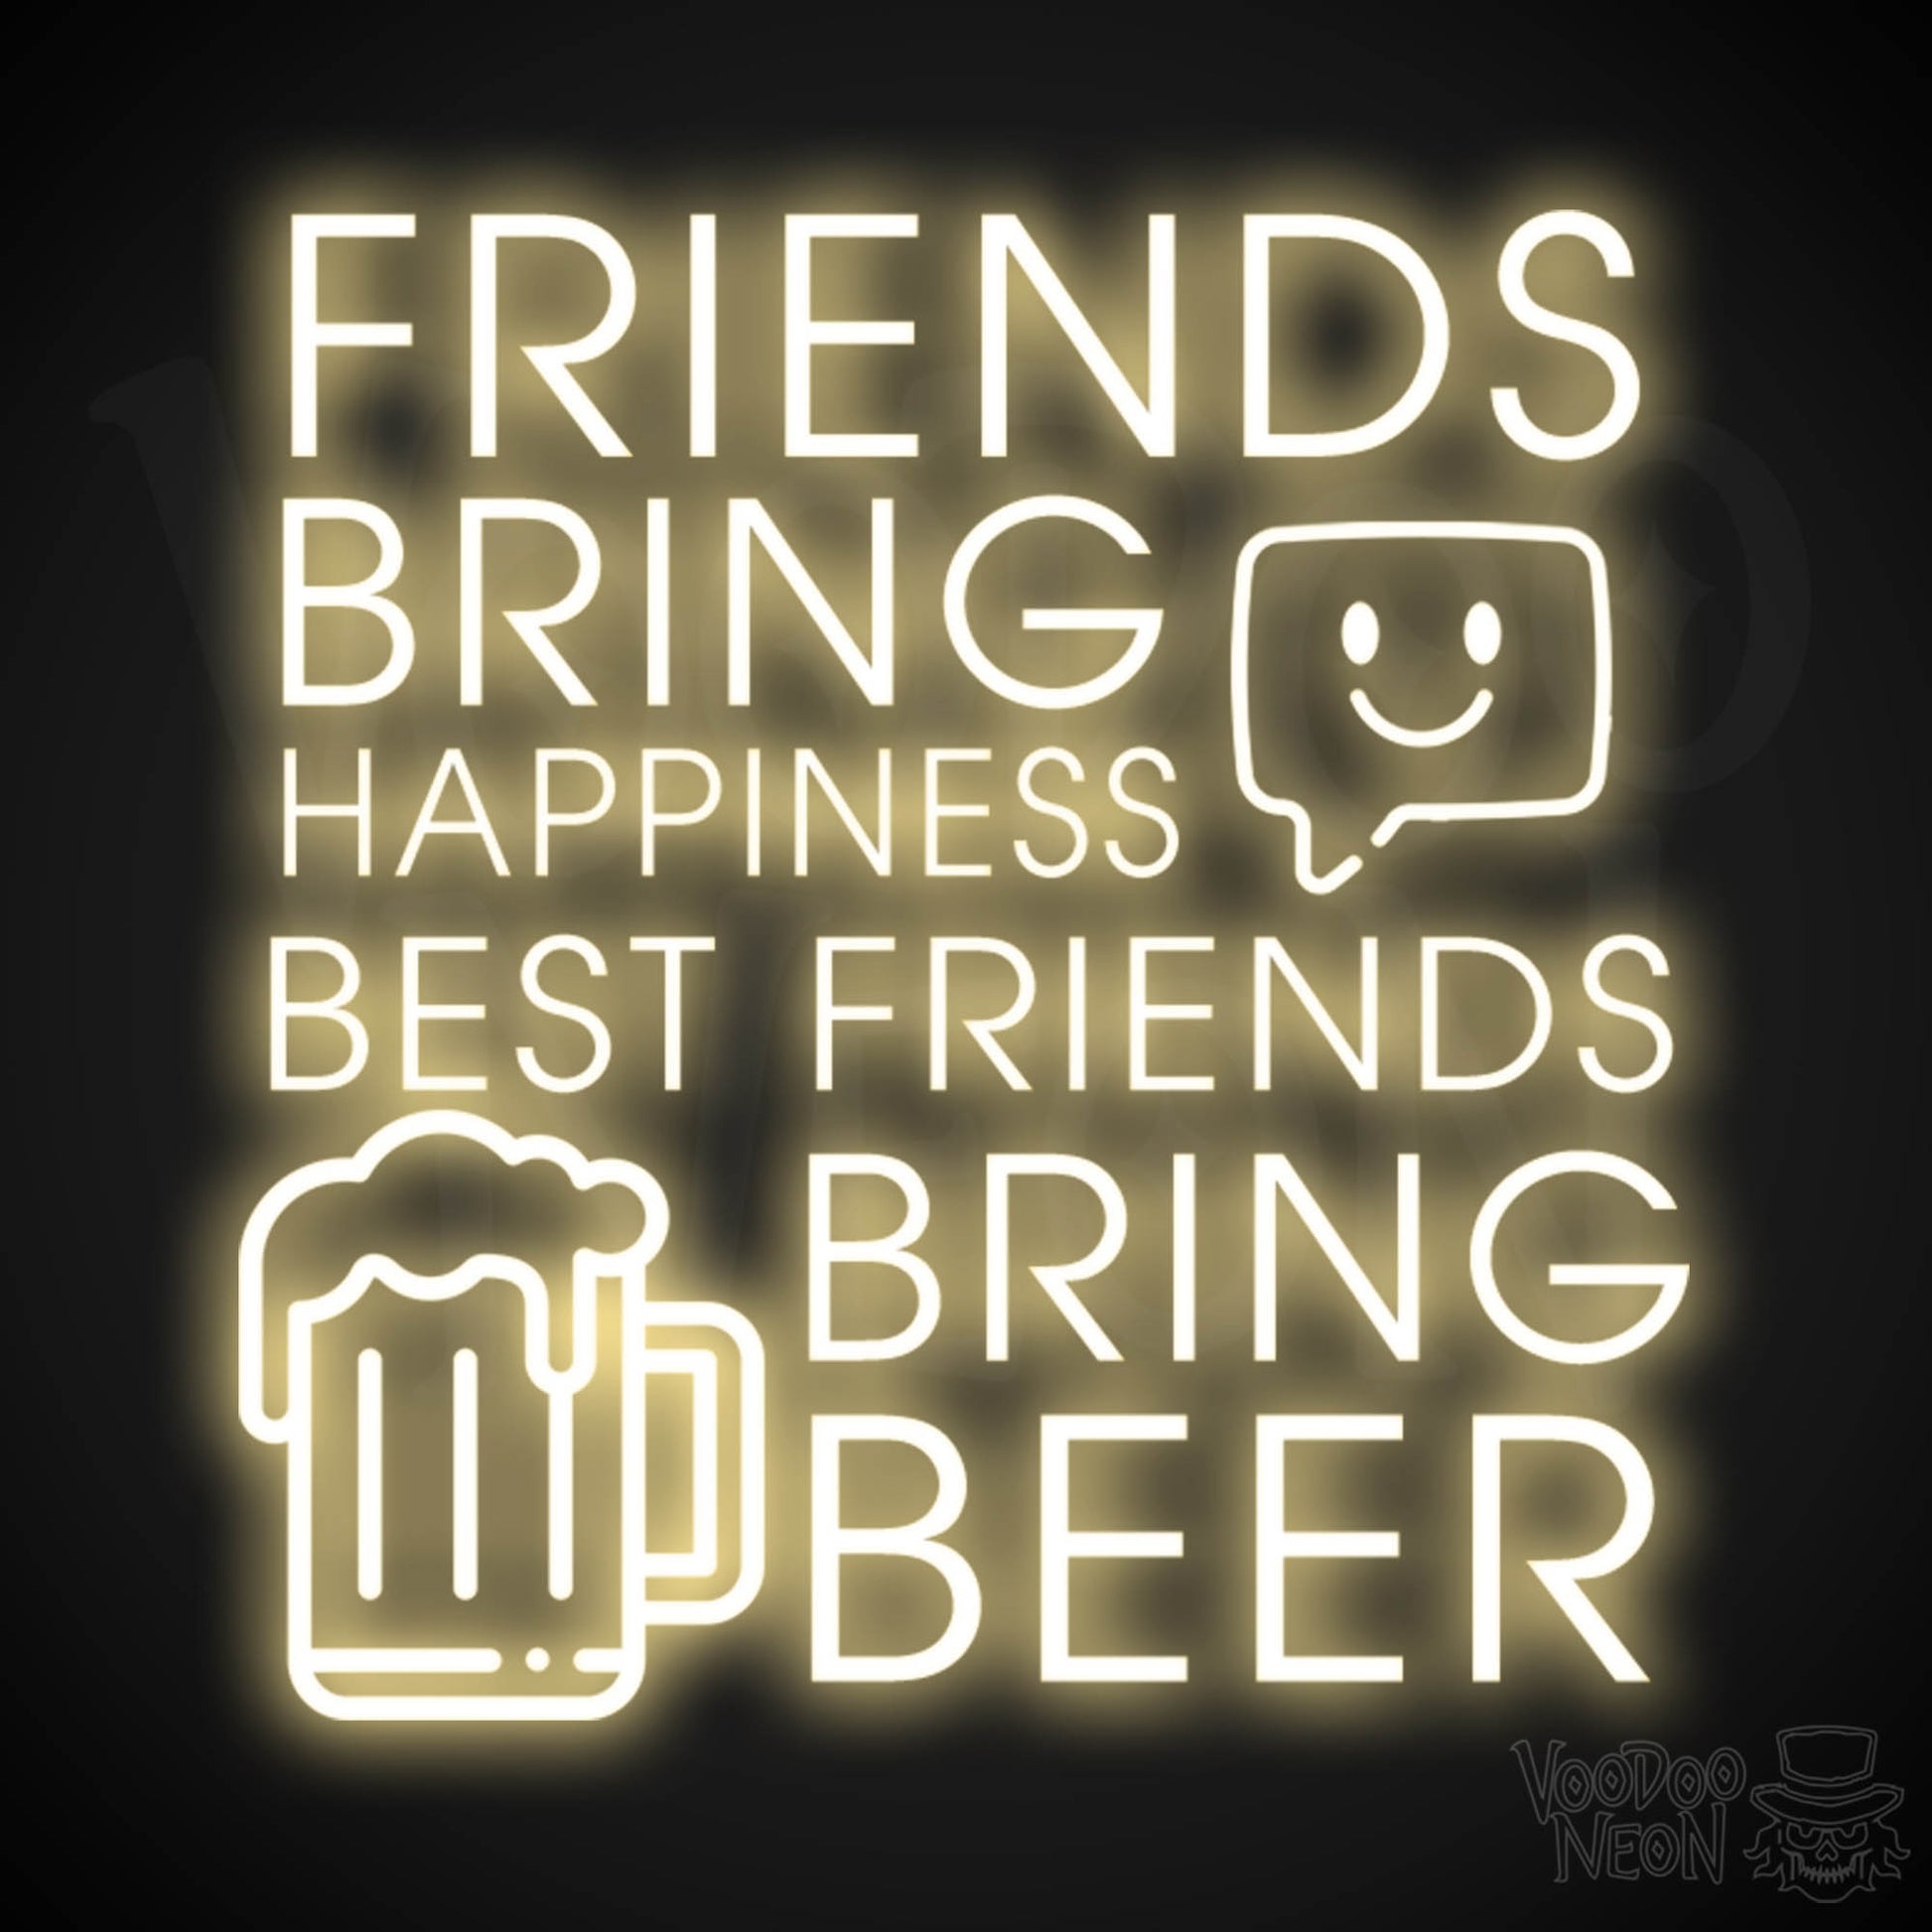 Friends Bring Happiness Best Friends Bring Beer Neon Sign - LED Lights Wall Art - Color Warm White